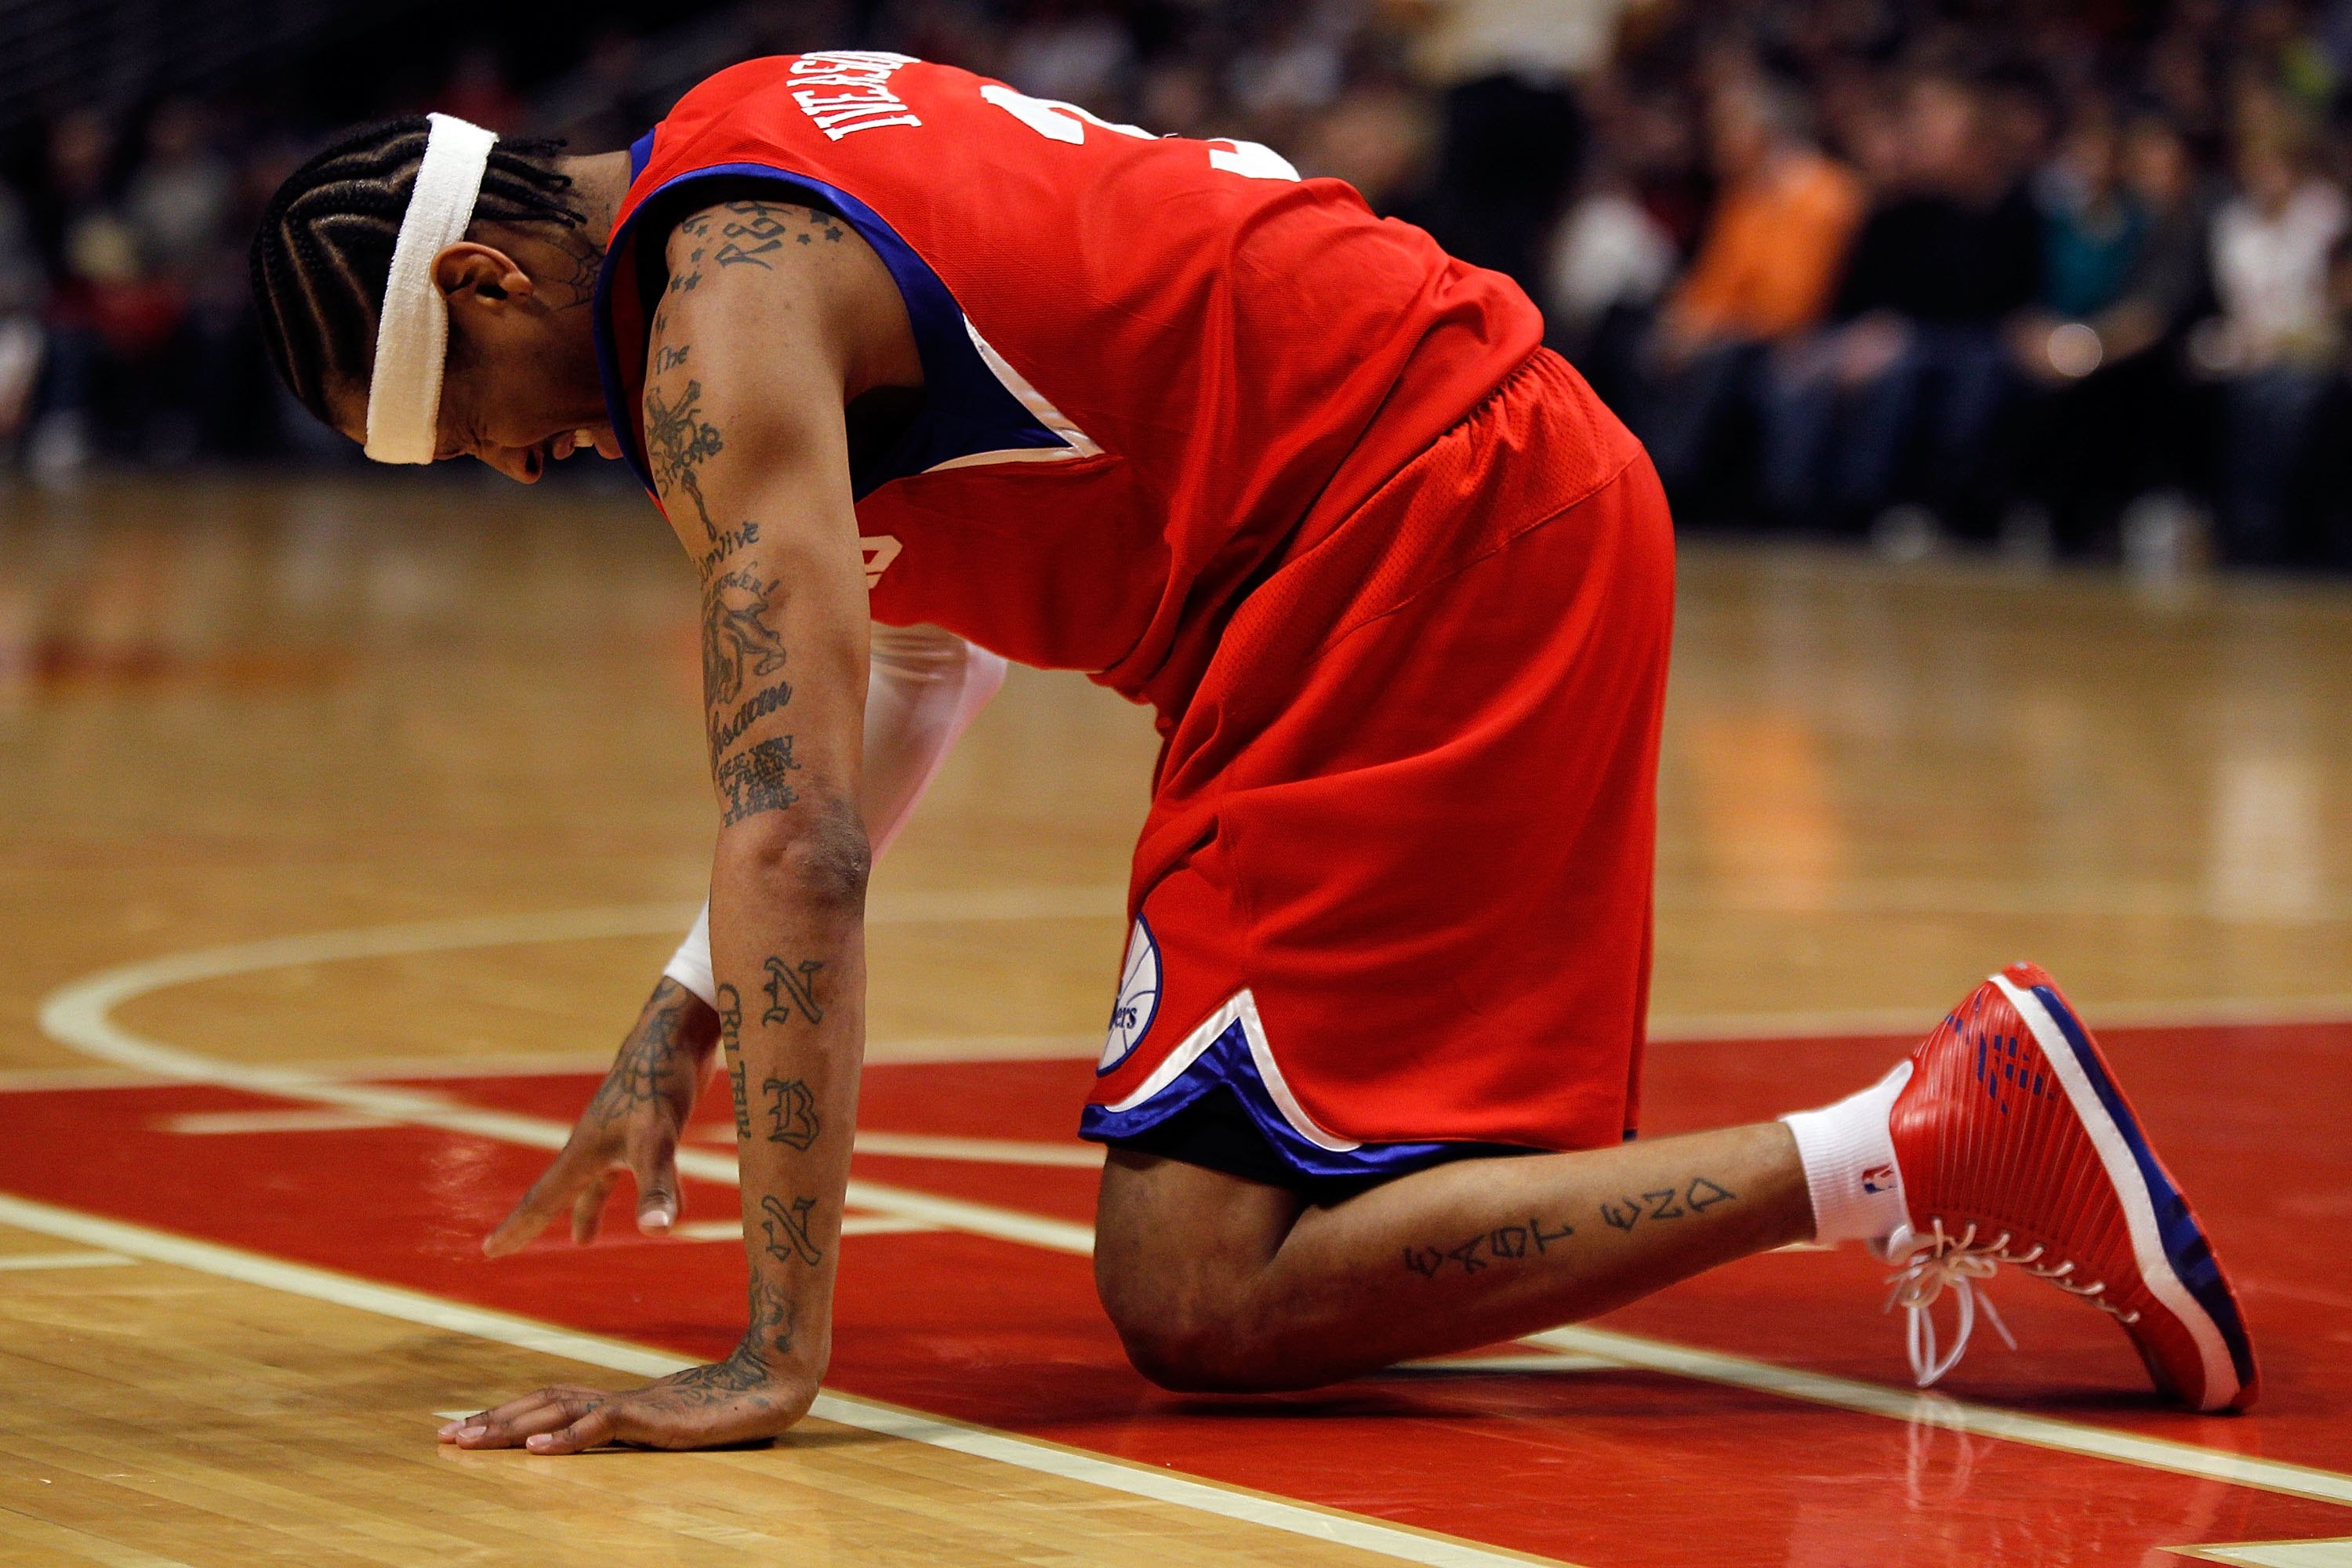 CHICAGO - FEBRUARY 20: Allen Iverson #3 of the Philadelphia 76ers is slow to get up after being hit in the face during a game against the Chicago Bulls at the United Center on February 20, 2010 in Chicago, Illinois. The Bulls defeated the 76ers 122-90. NO